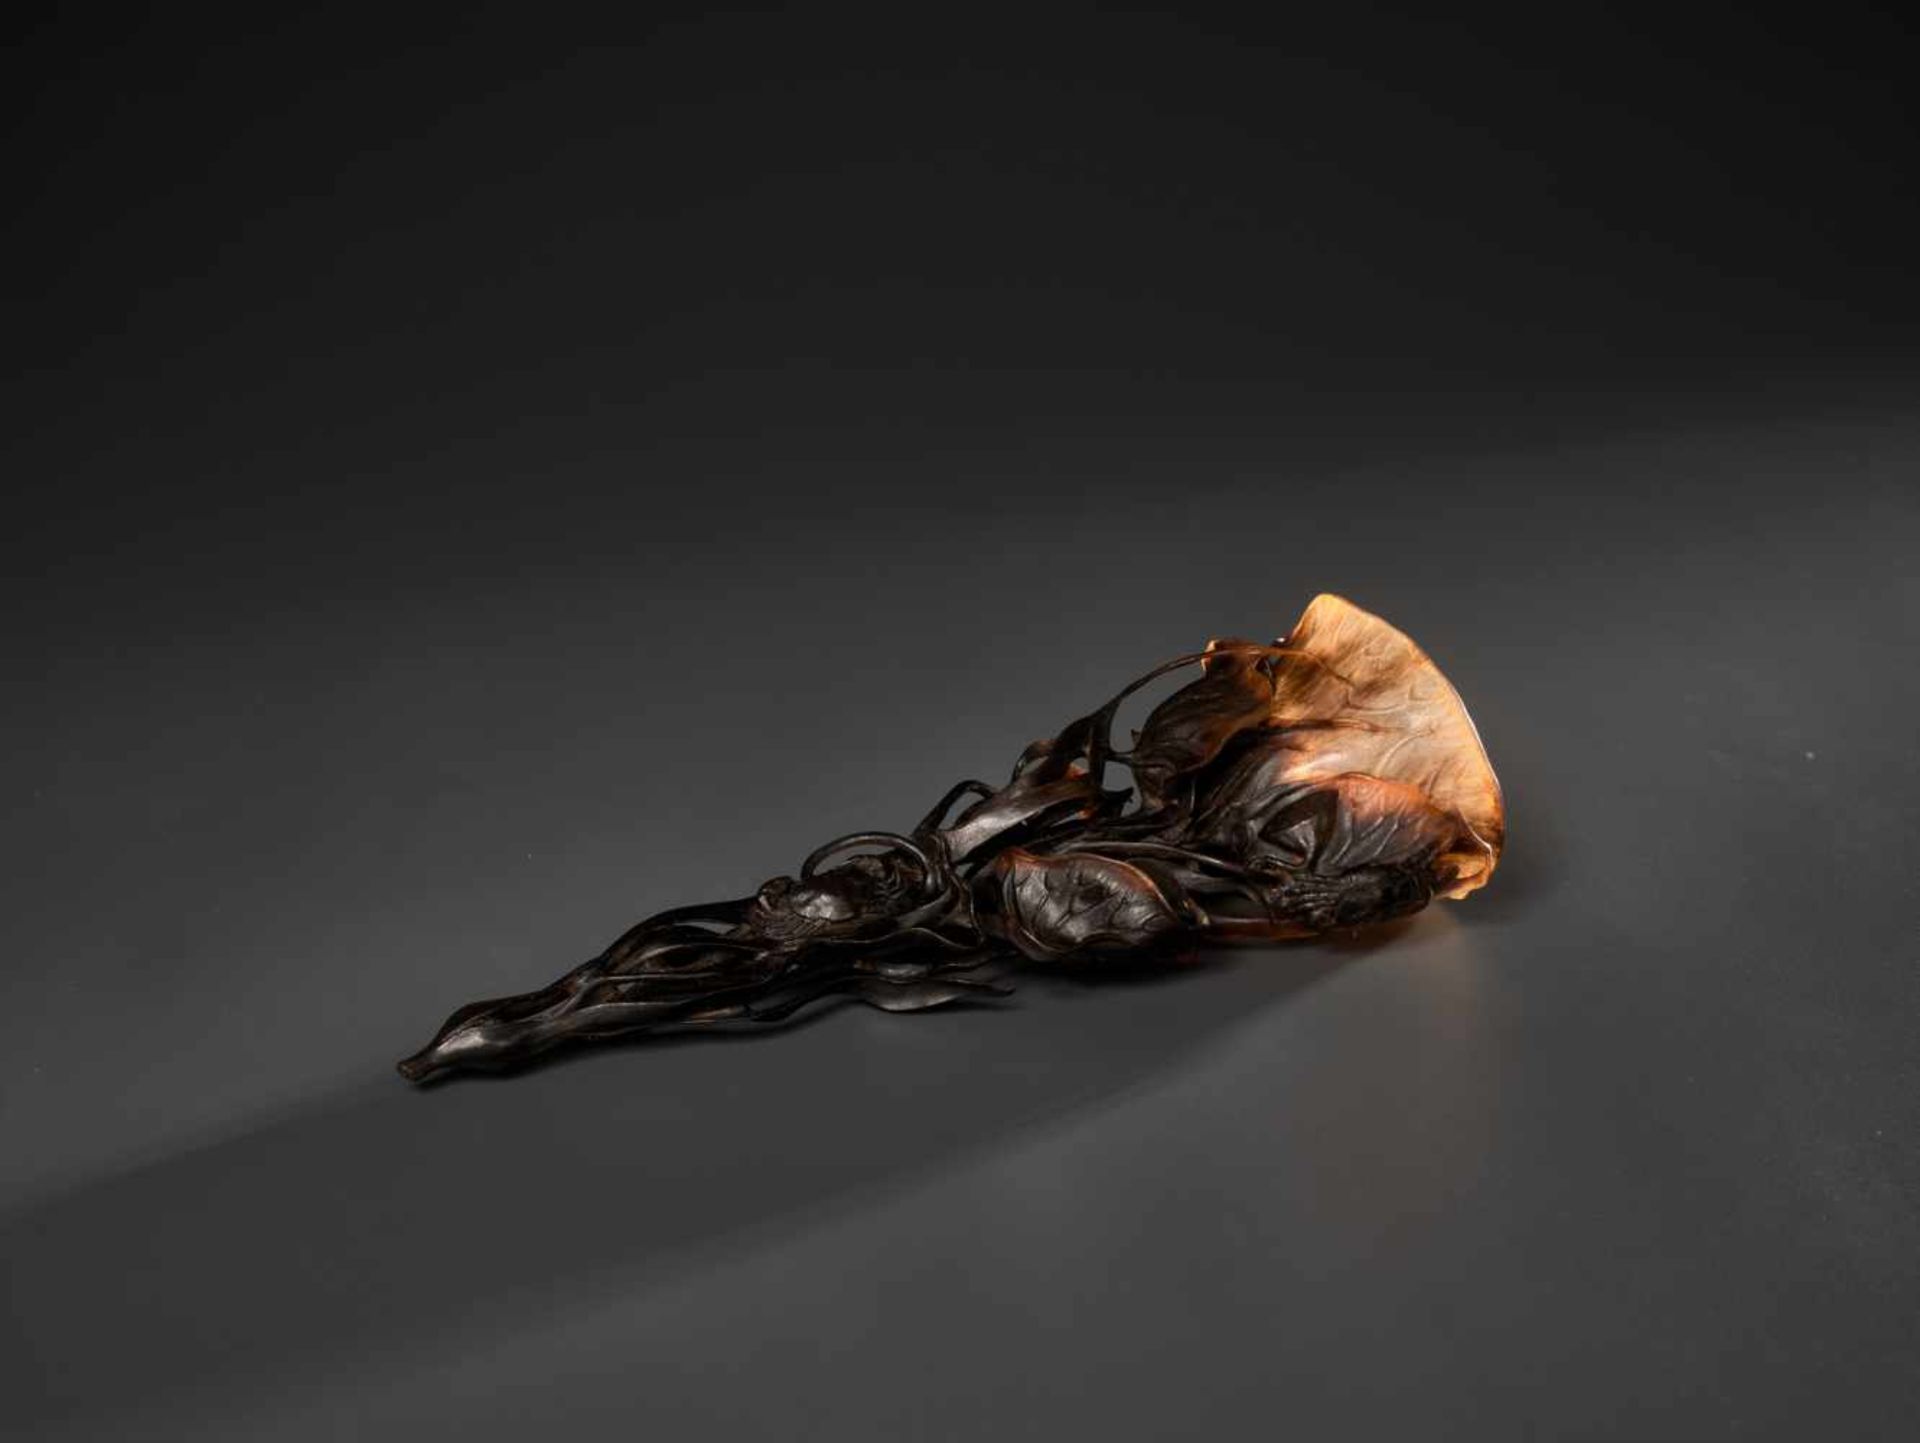 AN 18TH CENTURY RETICULATED FULL TIP RHINOCEROS ‘LOTUS’ CUP Rhinoceros horn in a deep brown to light - Bild 2 aus 9